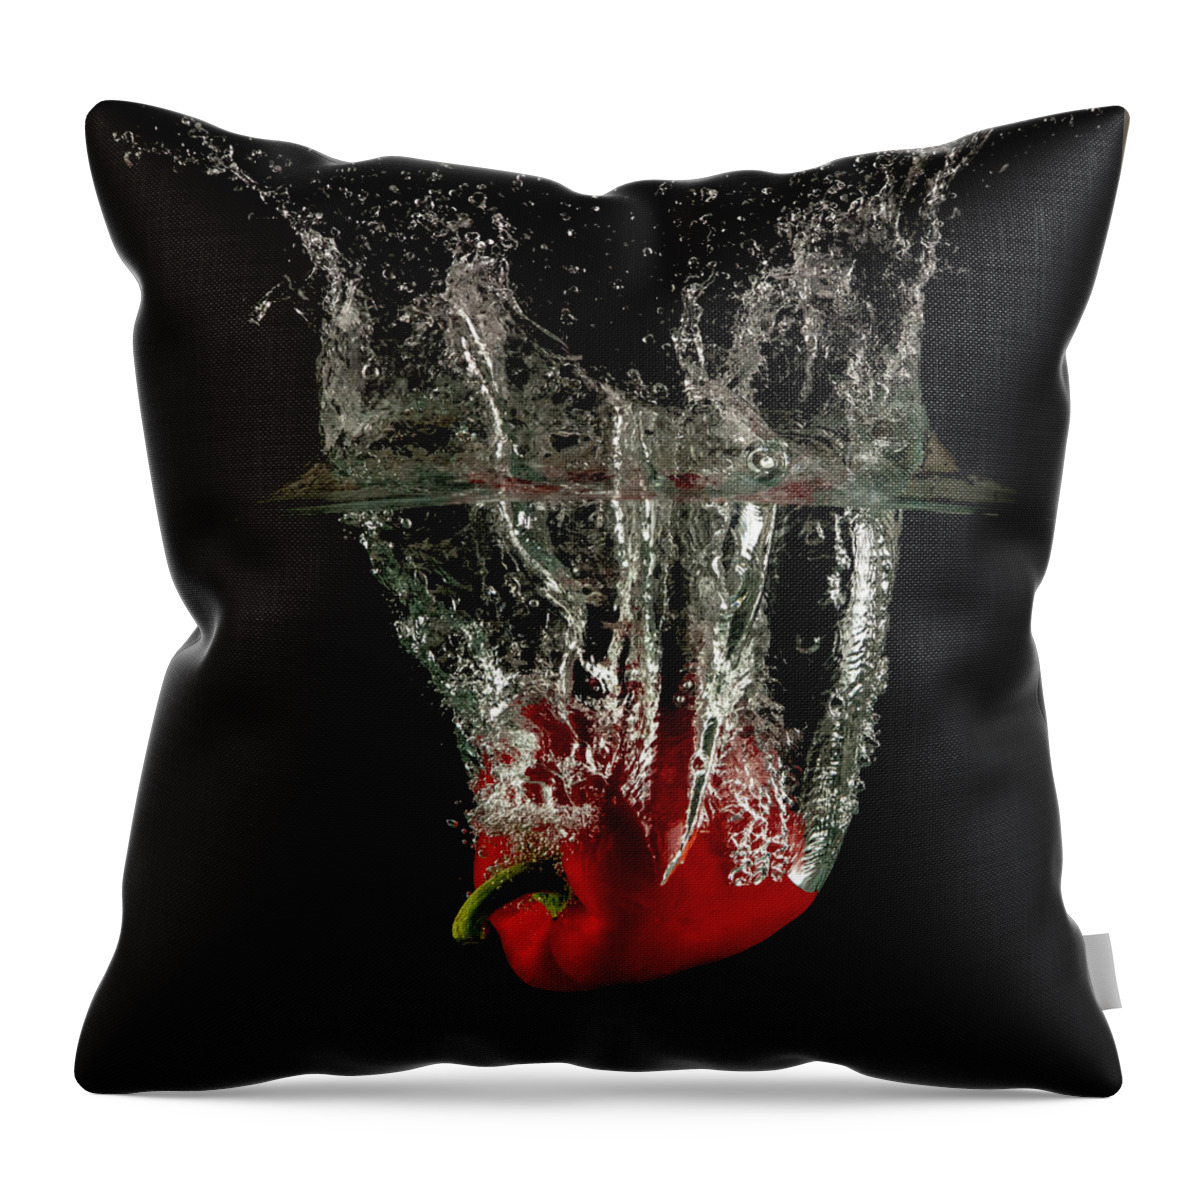 Pepper Throw Pillow featuring the photograph Red bell pepper dropped and slashing on water by Michalakis Ppalis